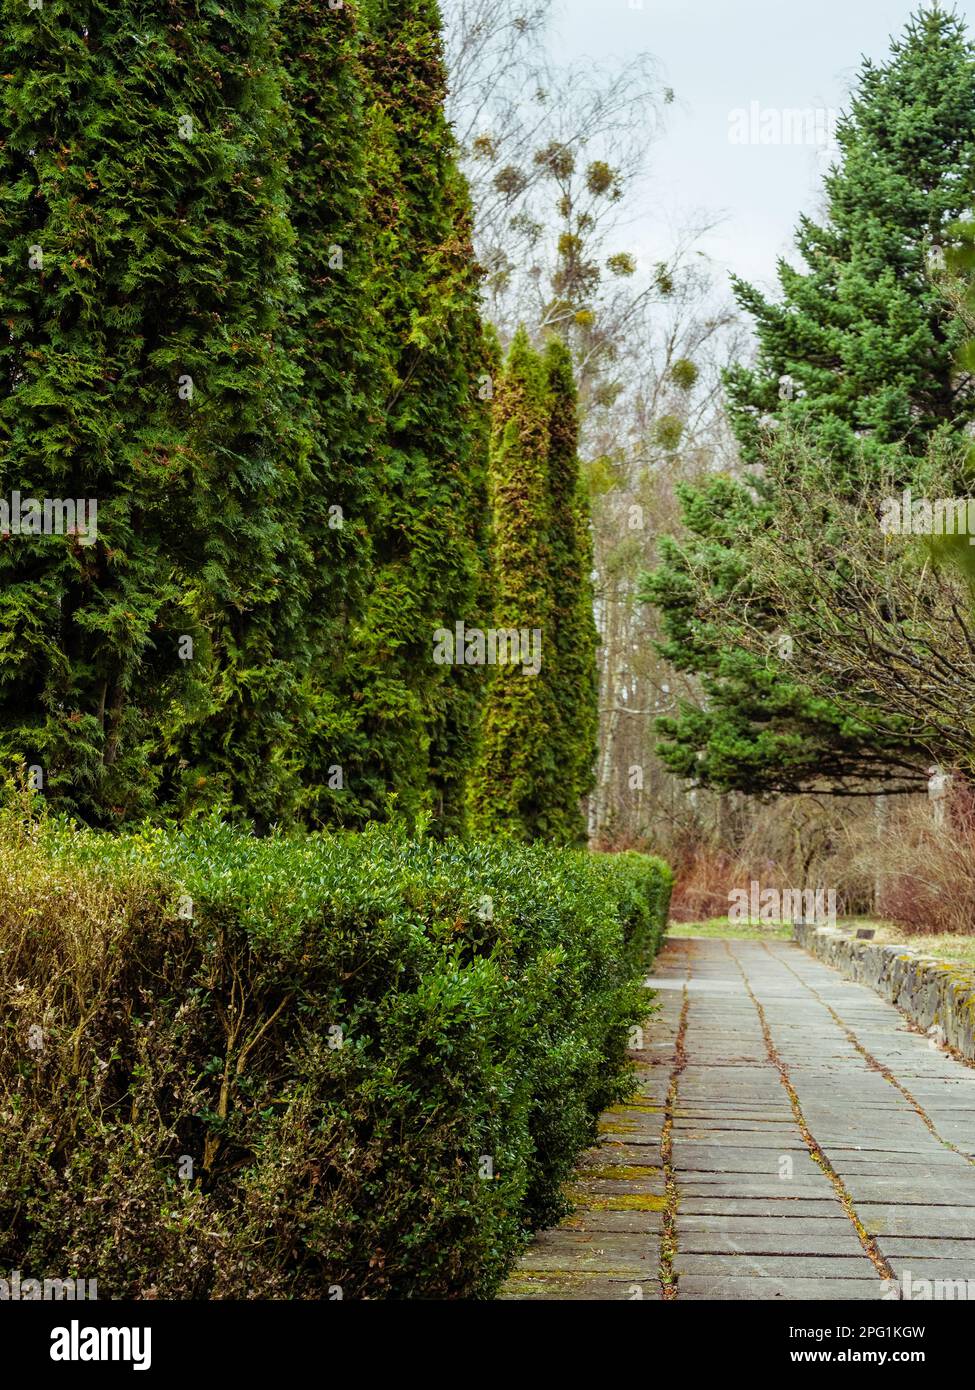 Walking alley of concrete slabs along green bushes and thuja trees Stock Photo